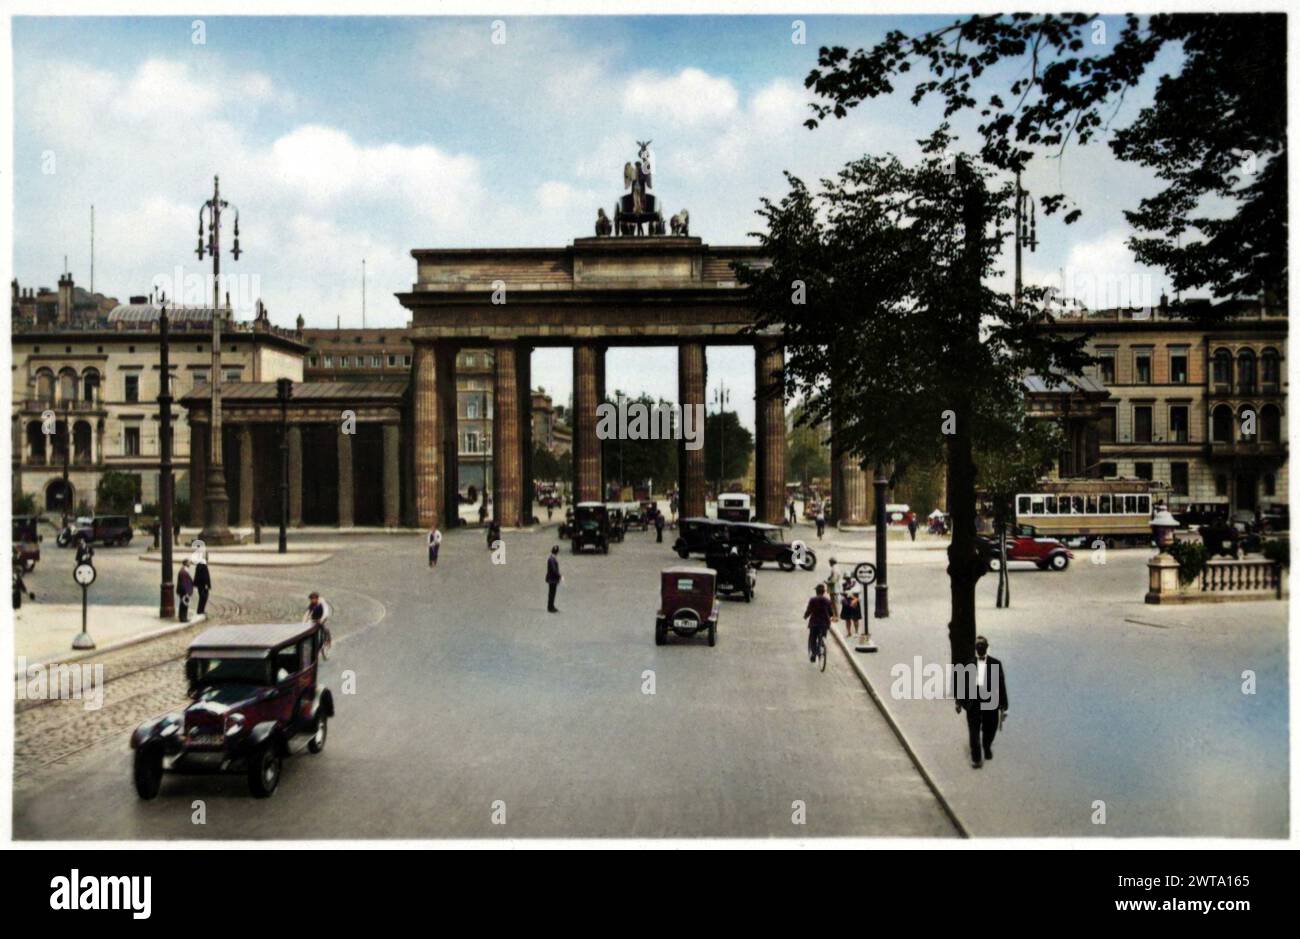 1928 c. , BERLIN , GERMANY : The BRANDENBURGER TOR ( Brandenburg Gate ). Is an 18th-century Neoclassical monument in Berlin , built on the orders of the King of Prussia Frederick William II after restoring the Orangist power by suppressing the Dutch popular unrest . Unknown photographer . DIGITALLY COLORIZED . - GERMANIA - PORTA DI BRANDEBURGO - BERLINO - FOTO STORICHE - HISTORY - GEOGRAFIA - GEOGRAPHY -  ARCHITECTURE - ARCHITETTURA - FOTO STORICA - PANORAMA  - STILE NEOCLASSICO - cars - automobili - traffico urbanocittadino - urban traffic ---  Archivio GBB Stock Photo